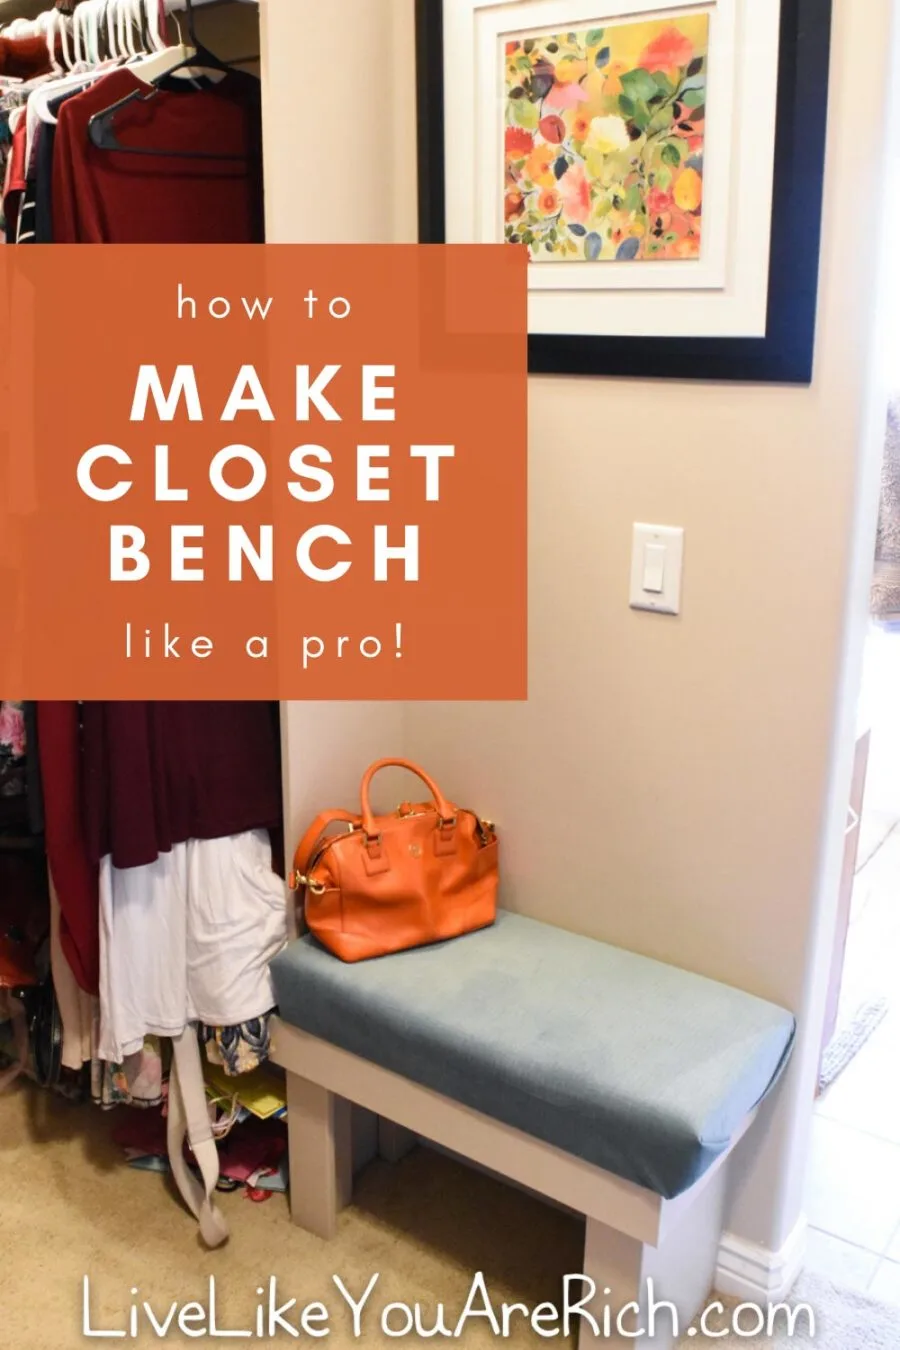 When remodeling a master closet, you may consider having an additional bench seat. This tutorial outlines how to make a closet bench similar to ours. #diy #bench #closet